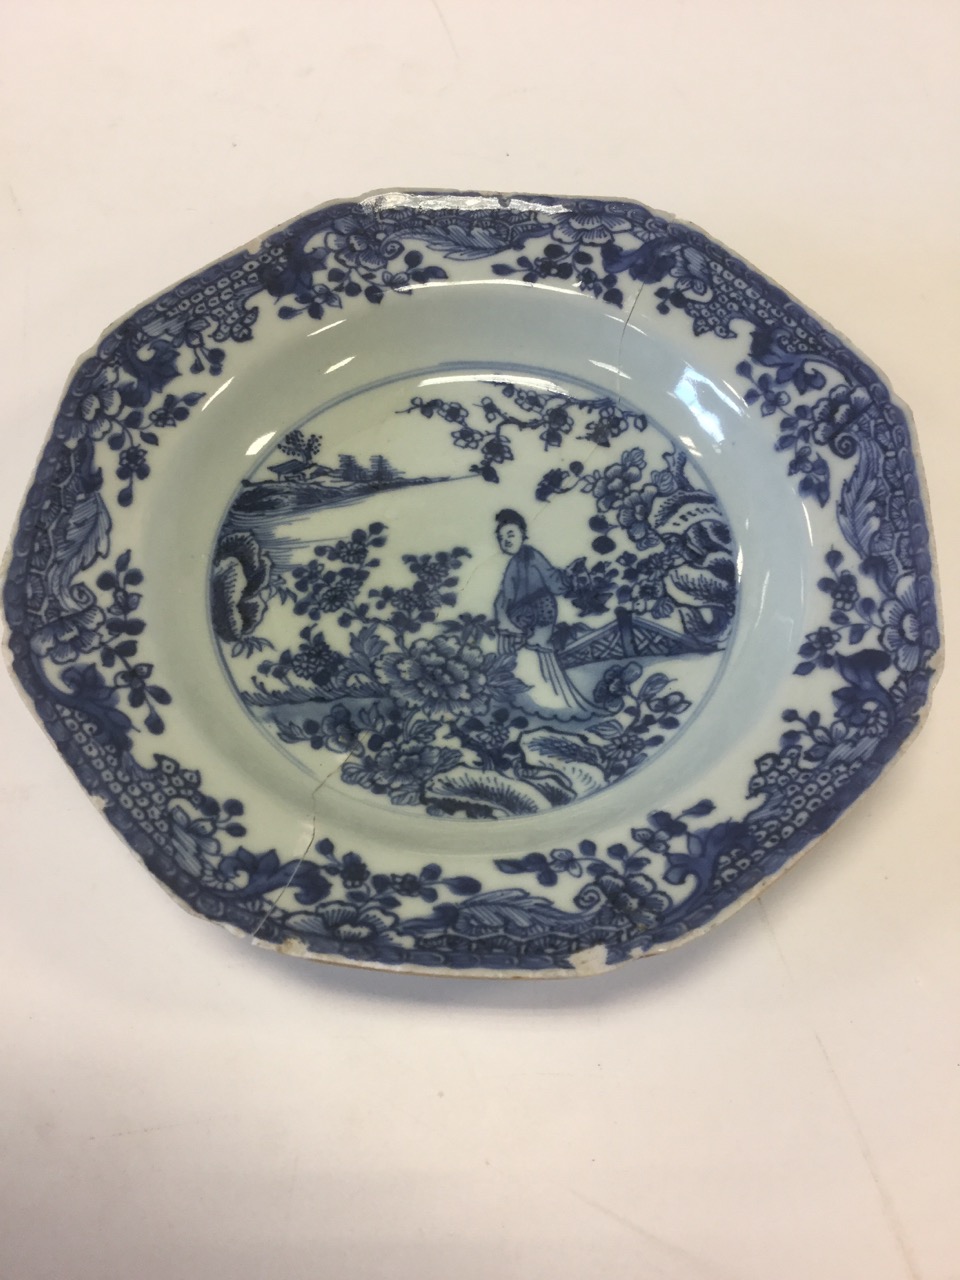 An octagonal nineteenth century Chinese porcelain blue & white bowl, decorated with figure in garden